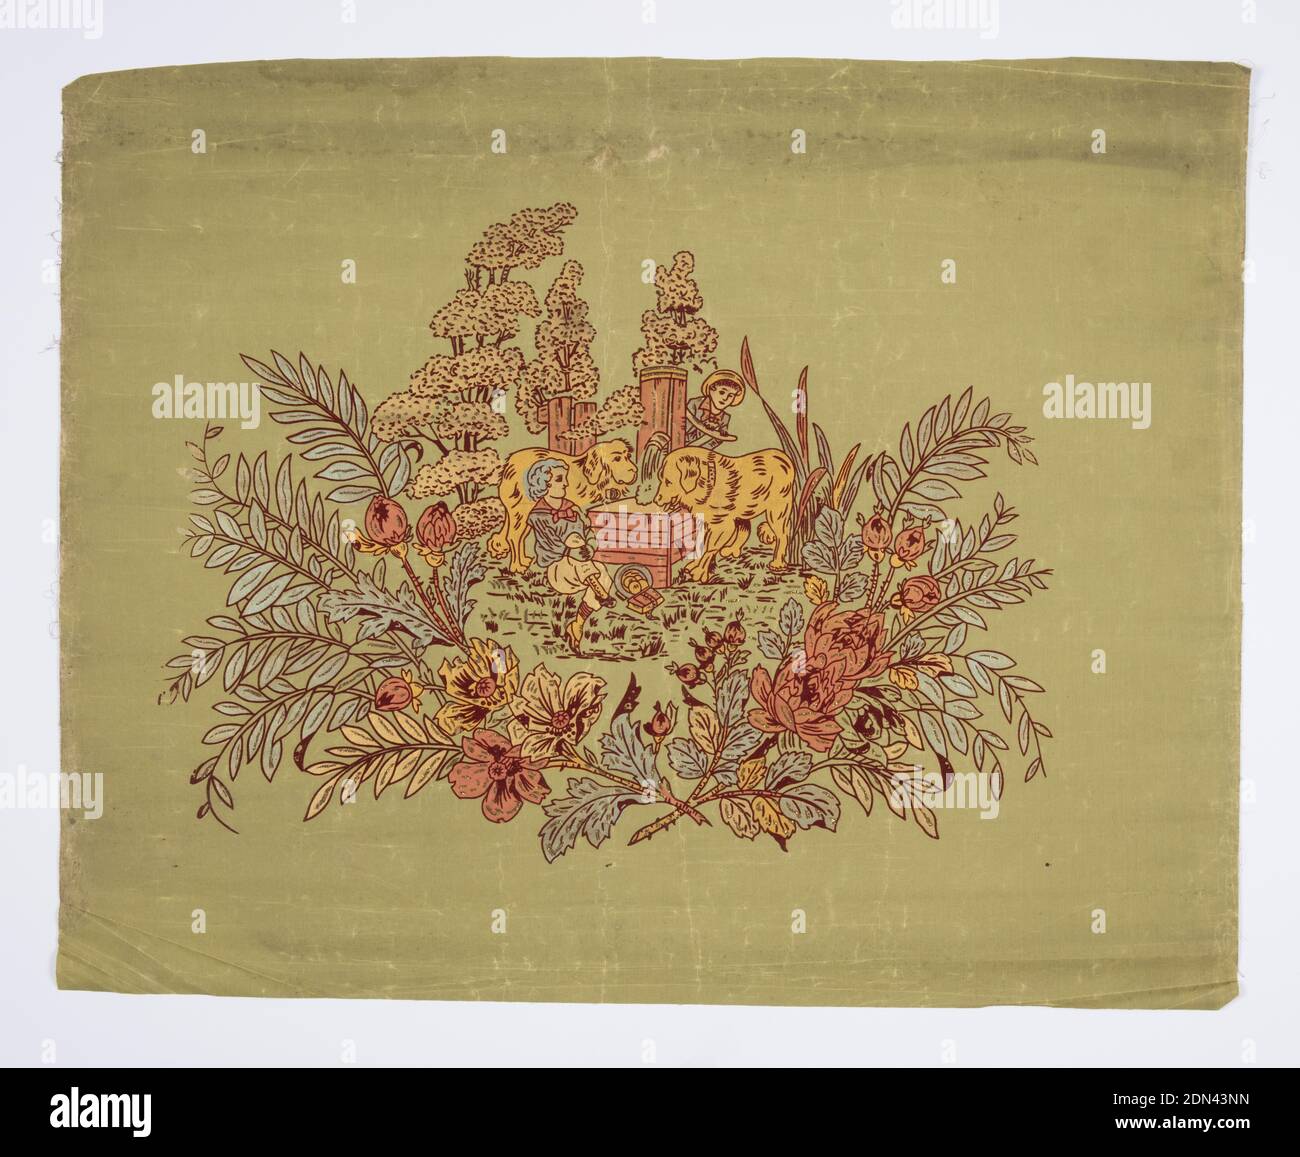 Window shade, Block printed and flocked, applied mica flakes, canvas, Two boys and two large dogs at watering trough. Surrounded by foliage. Printed in metallic colors and burgundy flock on light green fabric support. Flitter shade with applied gold mica flakes., USA, 1875–1900, Wallcoverings, Window shade Stock Photo